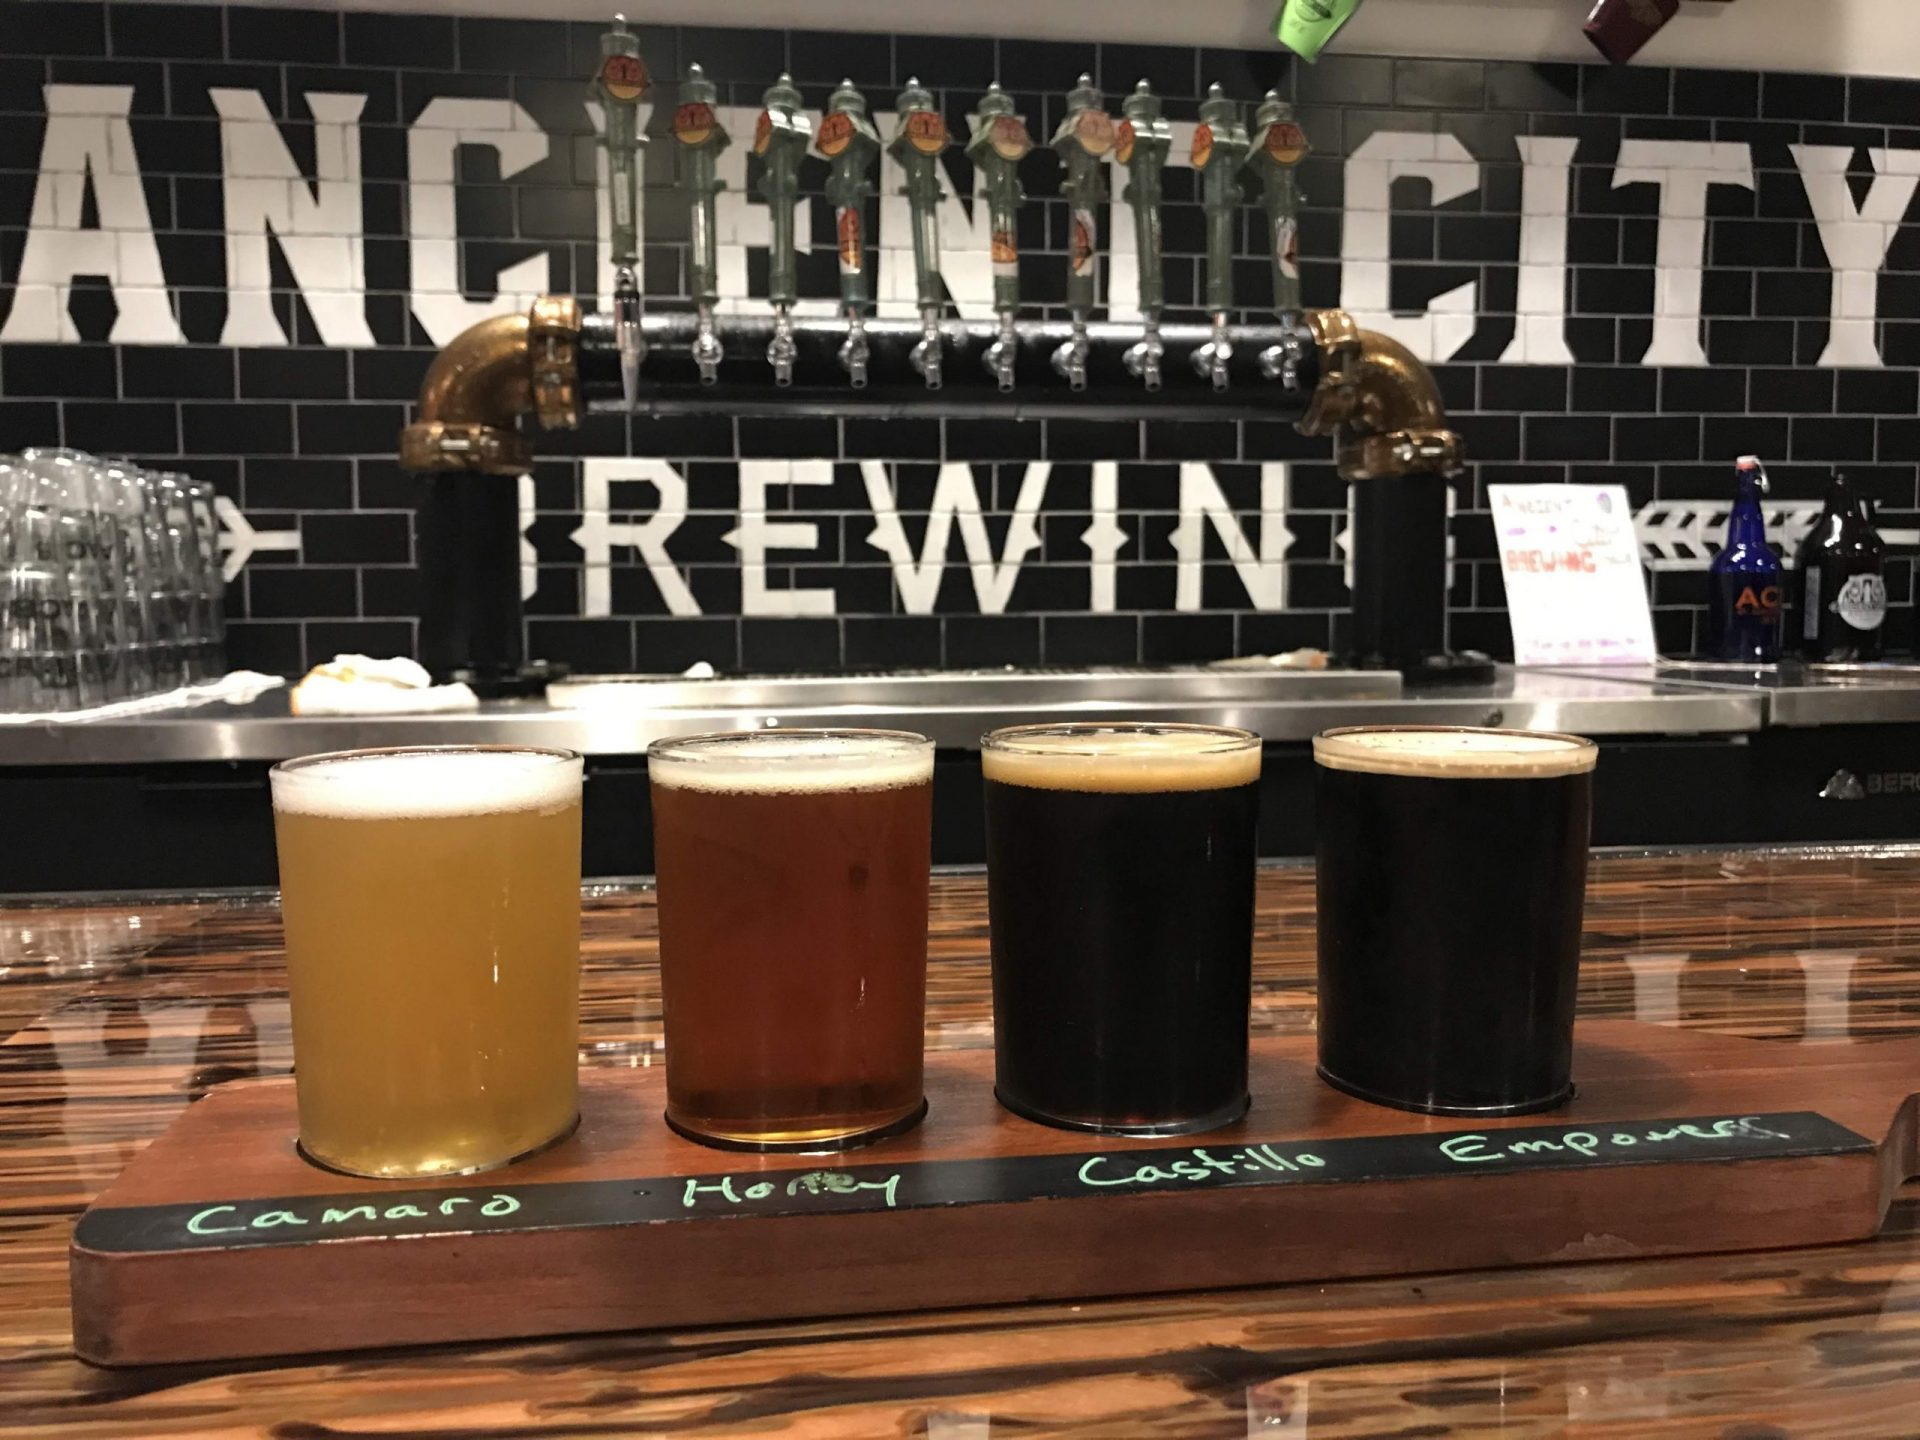 ancient city brewing craft beer bars in st augustine florida scaled - 7 Great Places for Craft Beer in St. Augustine, Florida